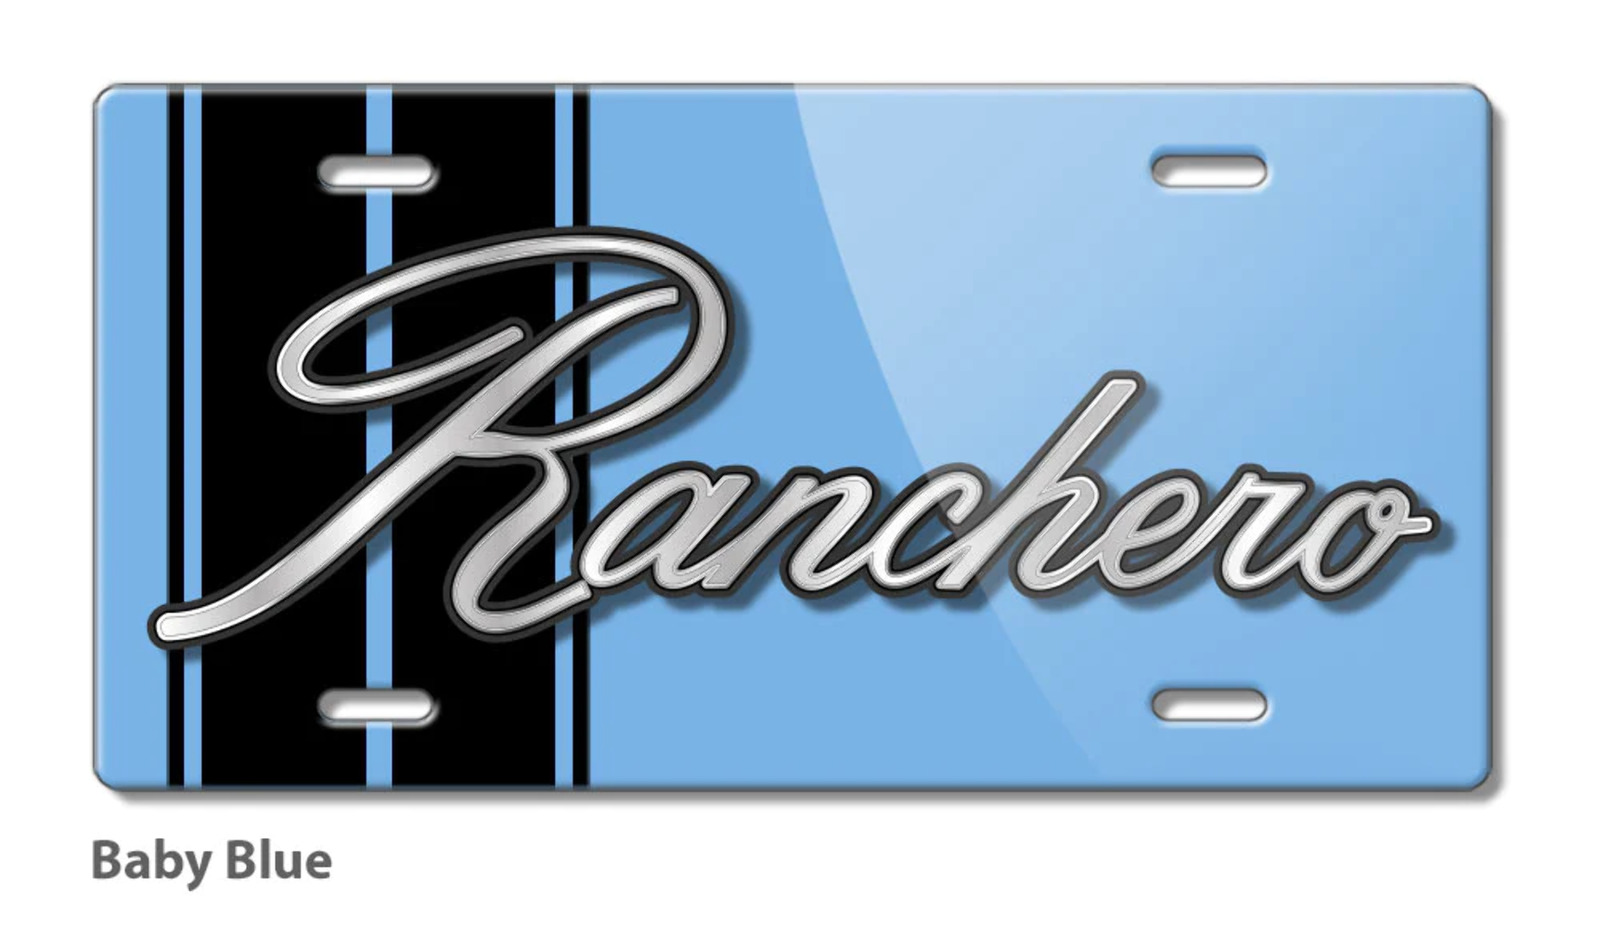 1972 - 1976 Ford Ranchero Emblem Novelty License Plate - 16 colors - Made in USA